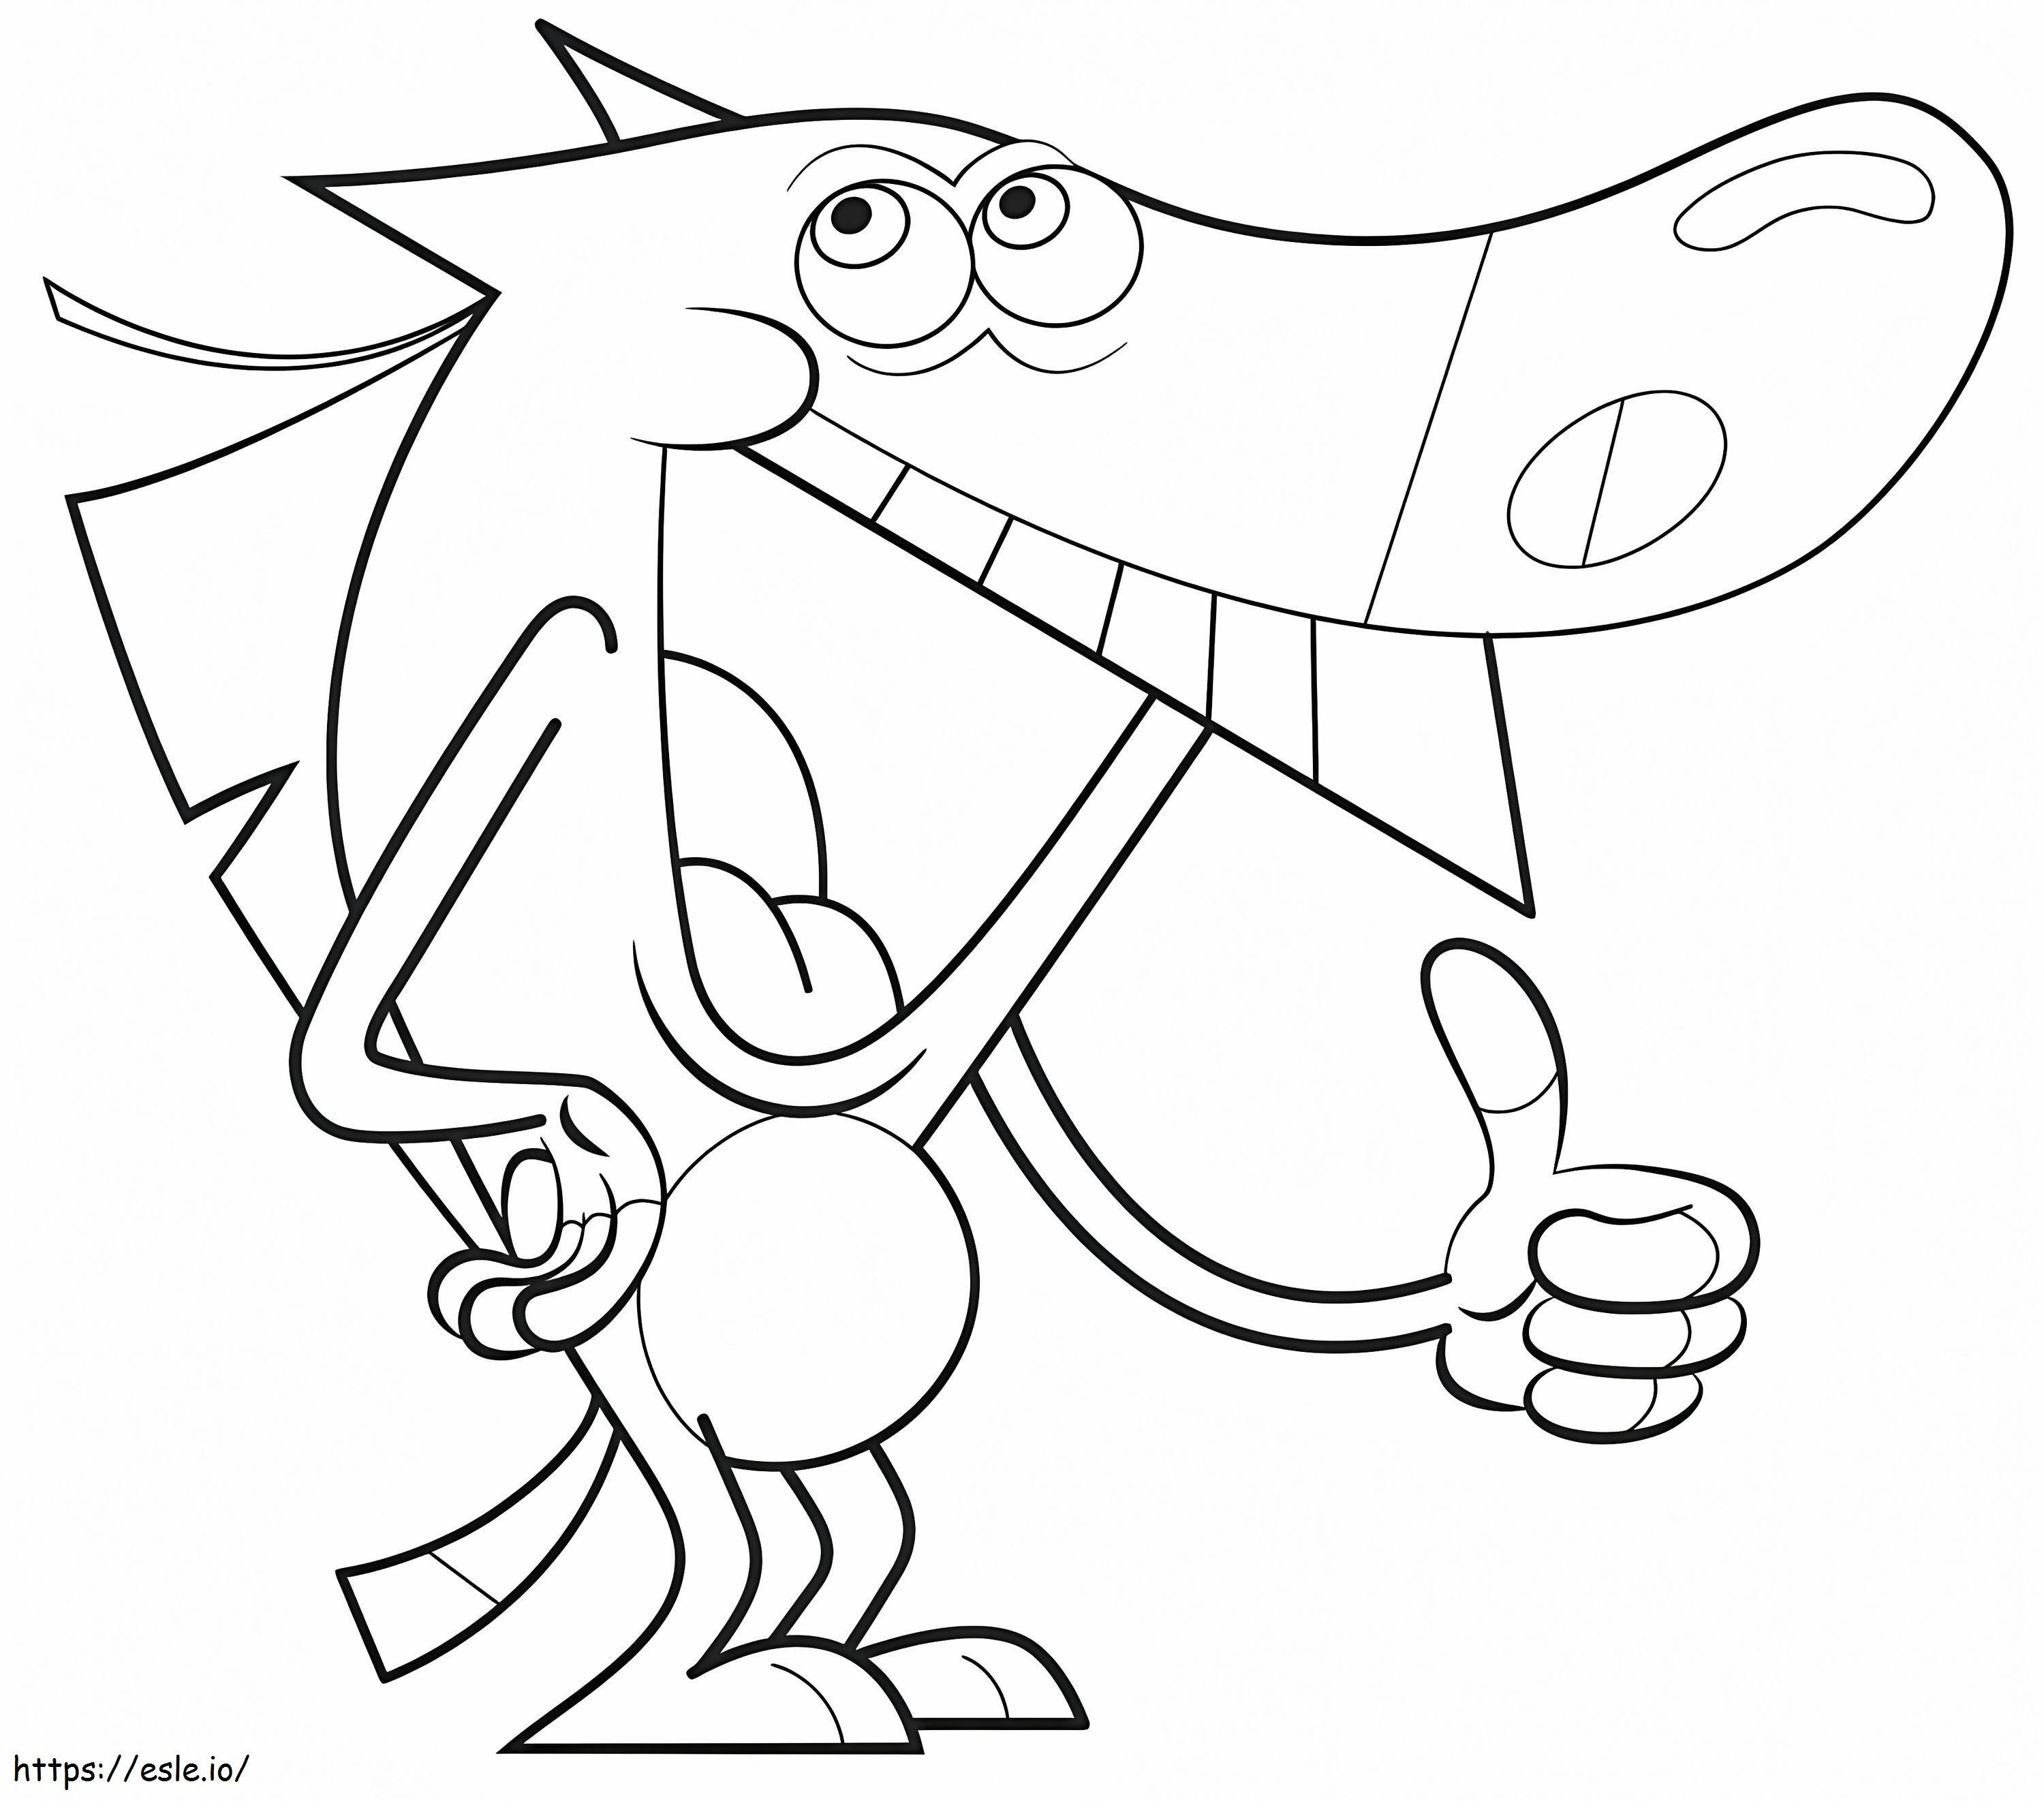 Zig Is Smiling coloring page